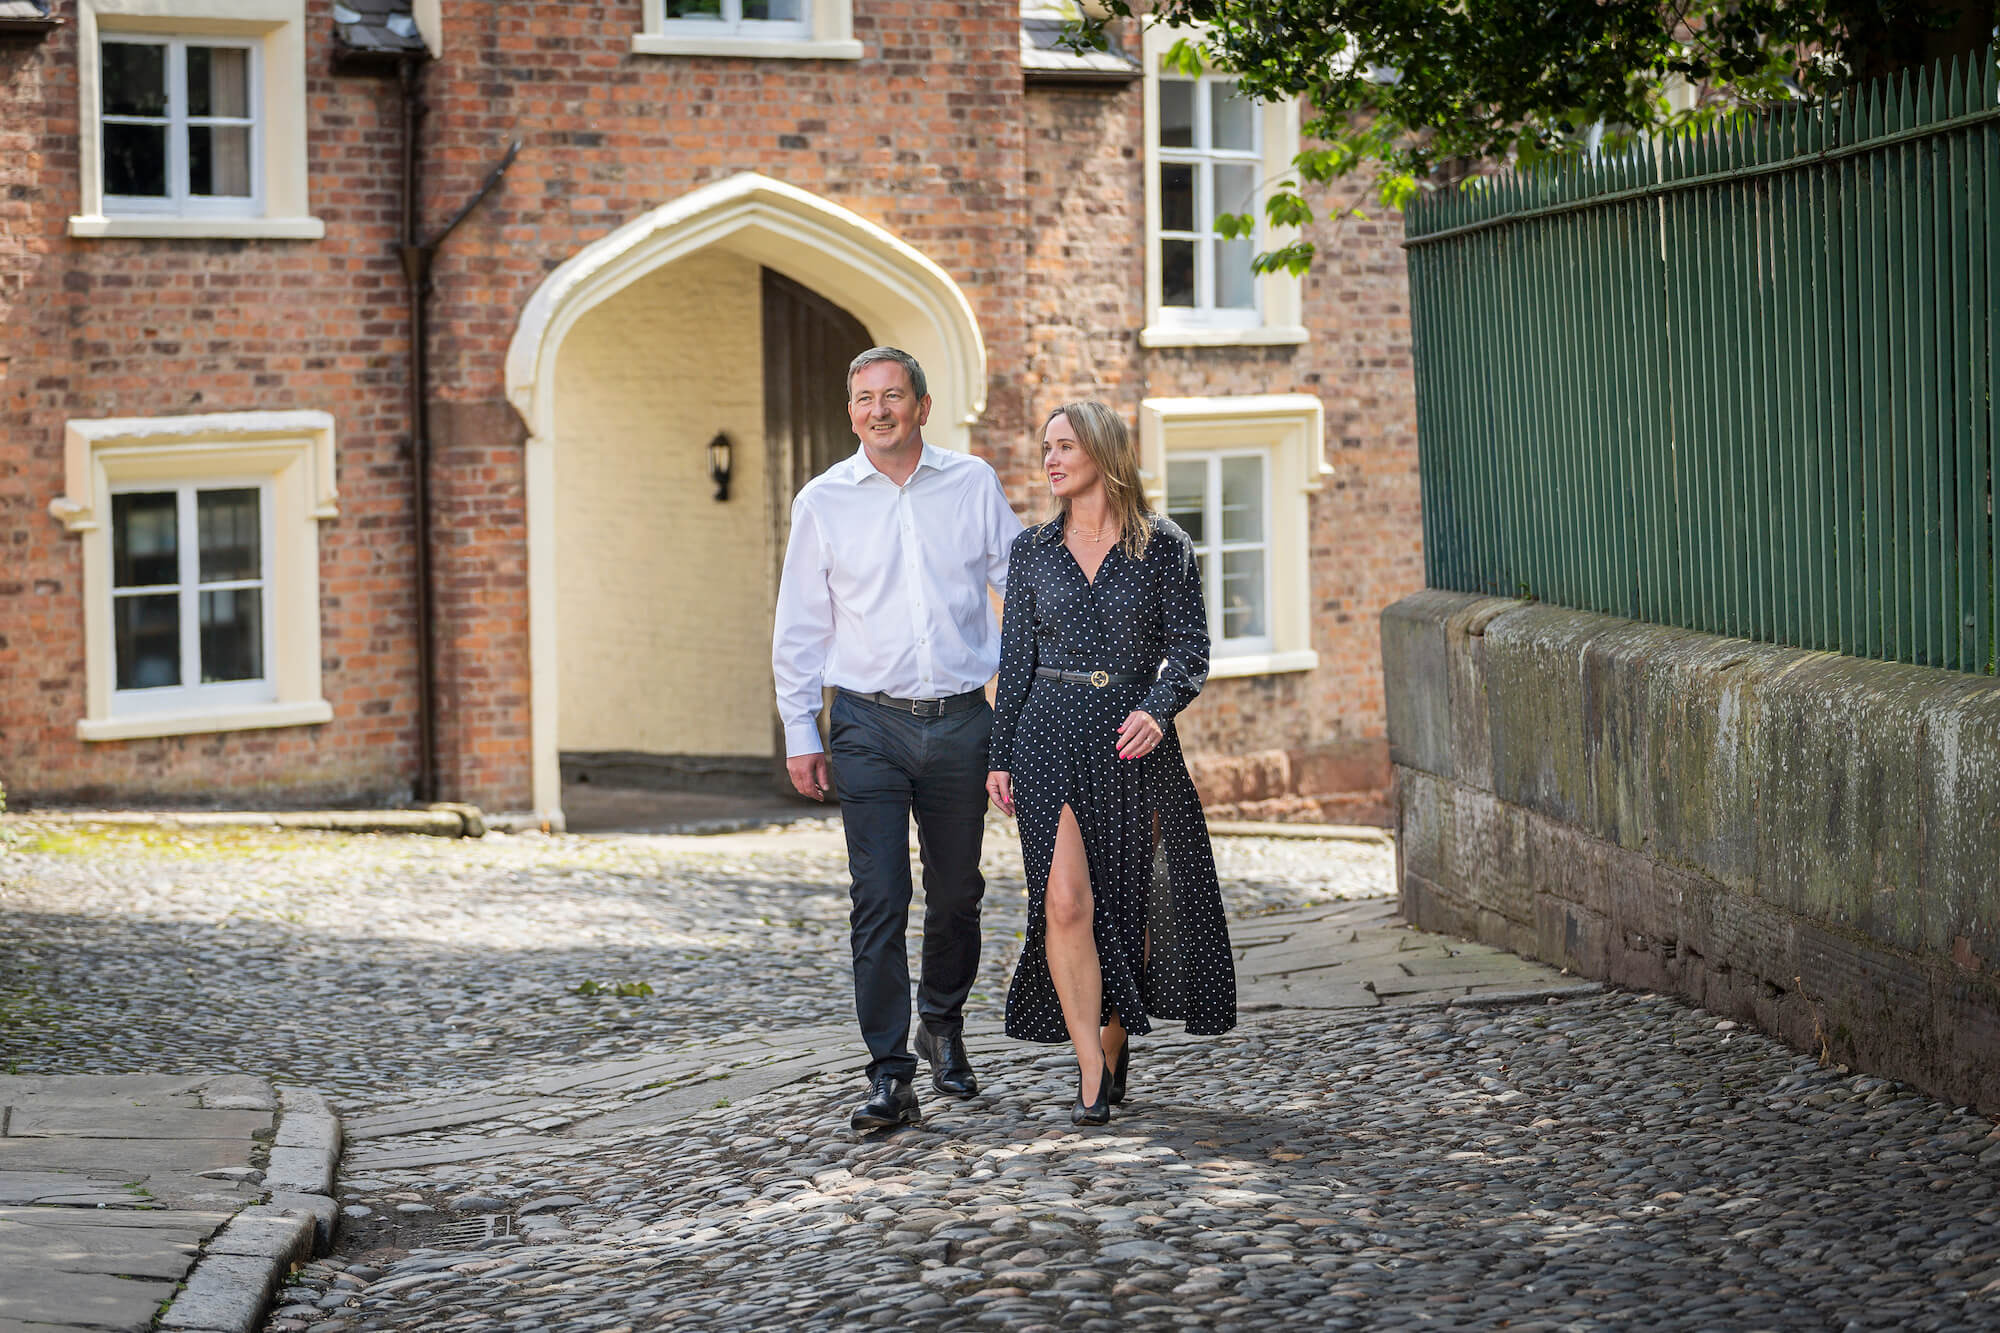 John and Lisa Curran - owners of local independant estate agency Currans Homes take a stroll through the cobbled streets of the historic city of Chester, where they live and work as local property experts.